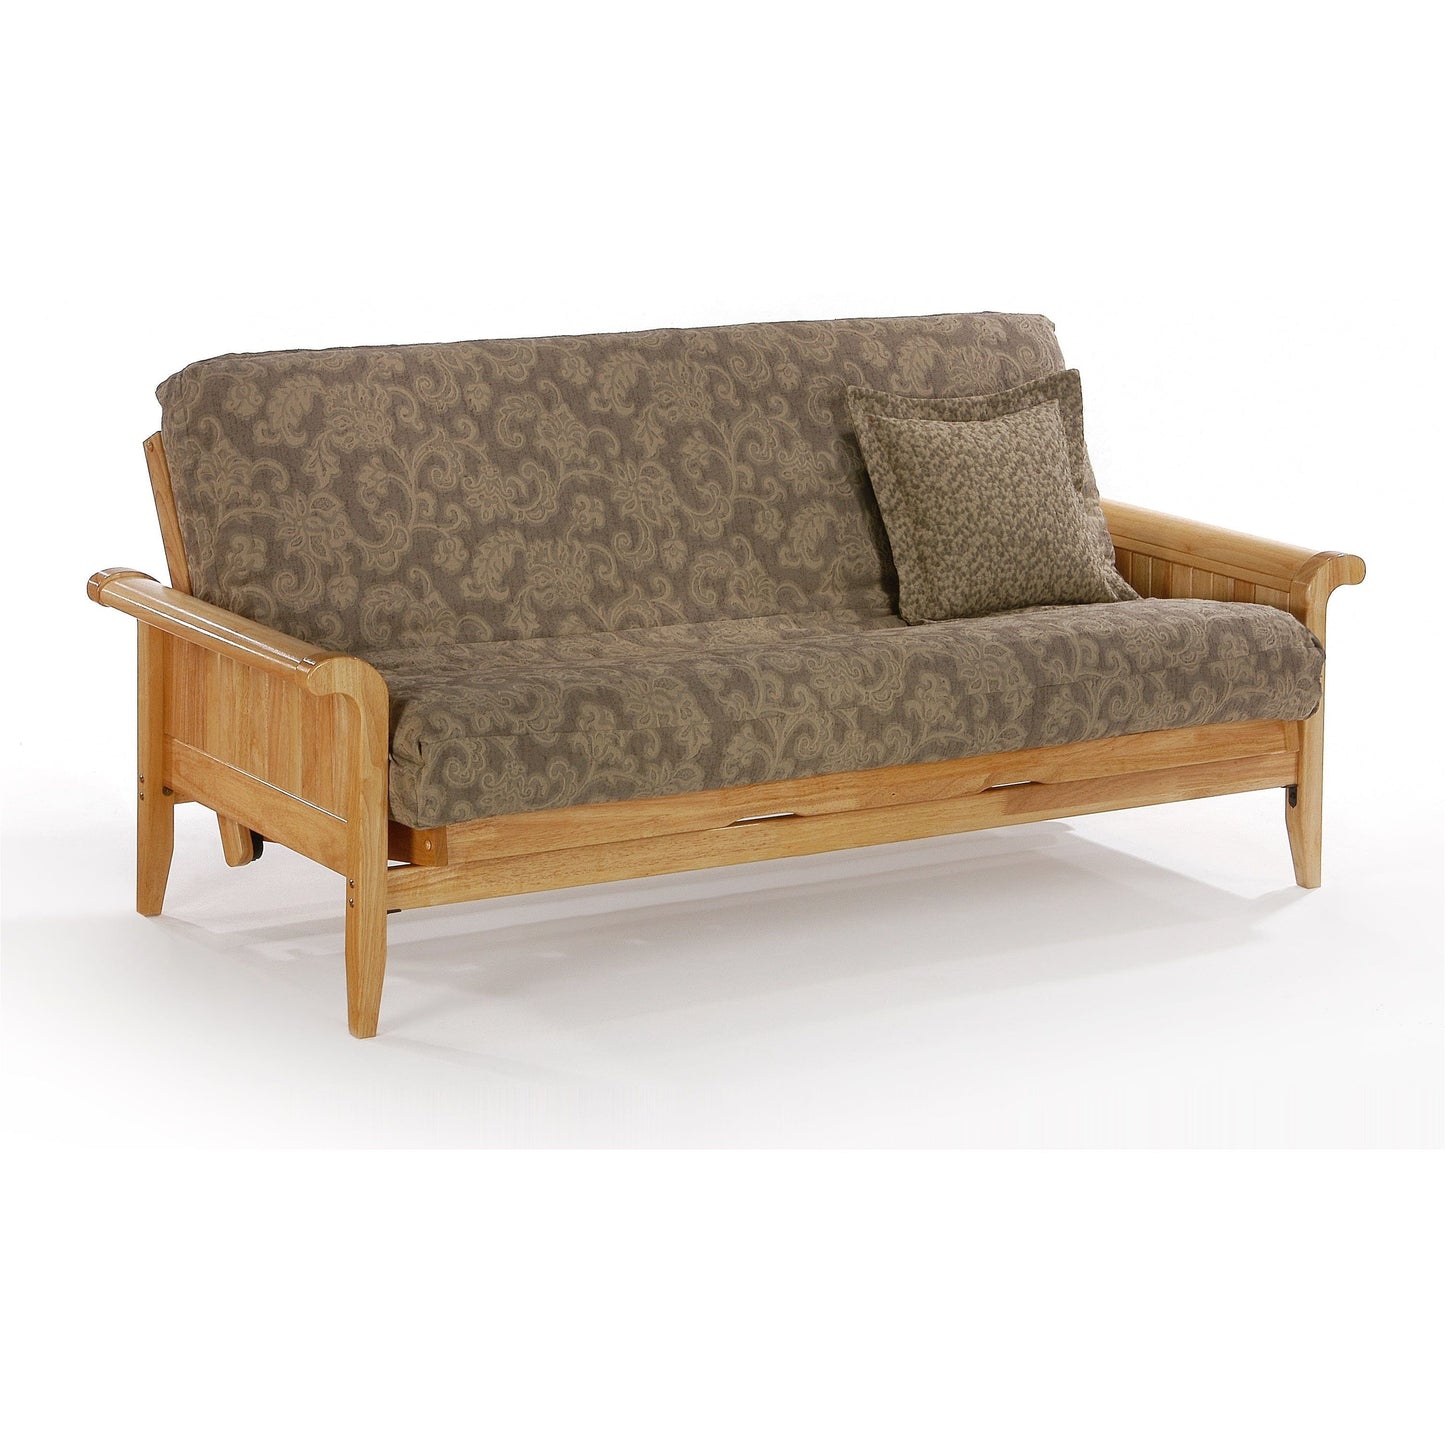 Night and Day Venice Queen Futon Frame in black walnut finish Natural BA-VNC-BMG-QEN-NA